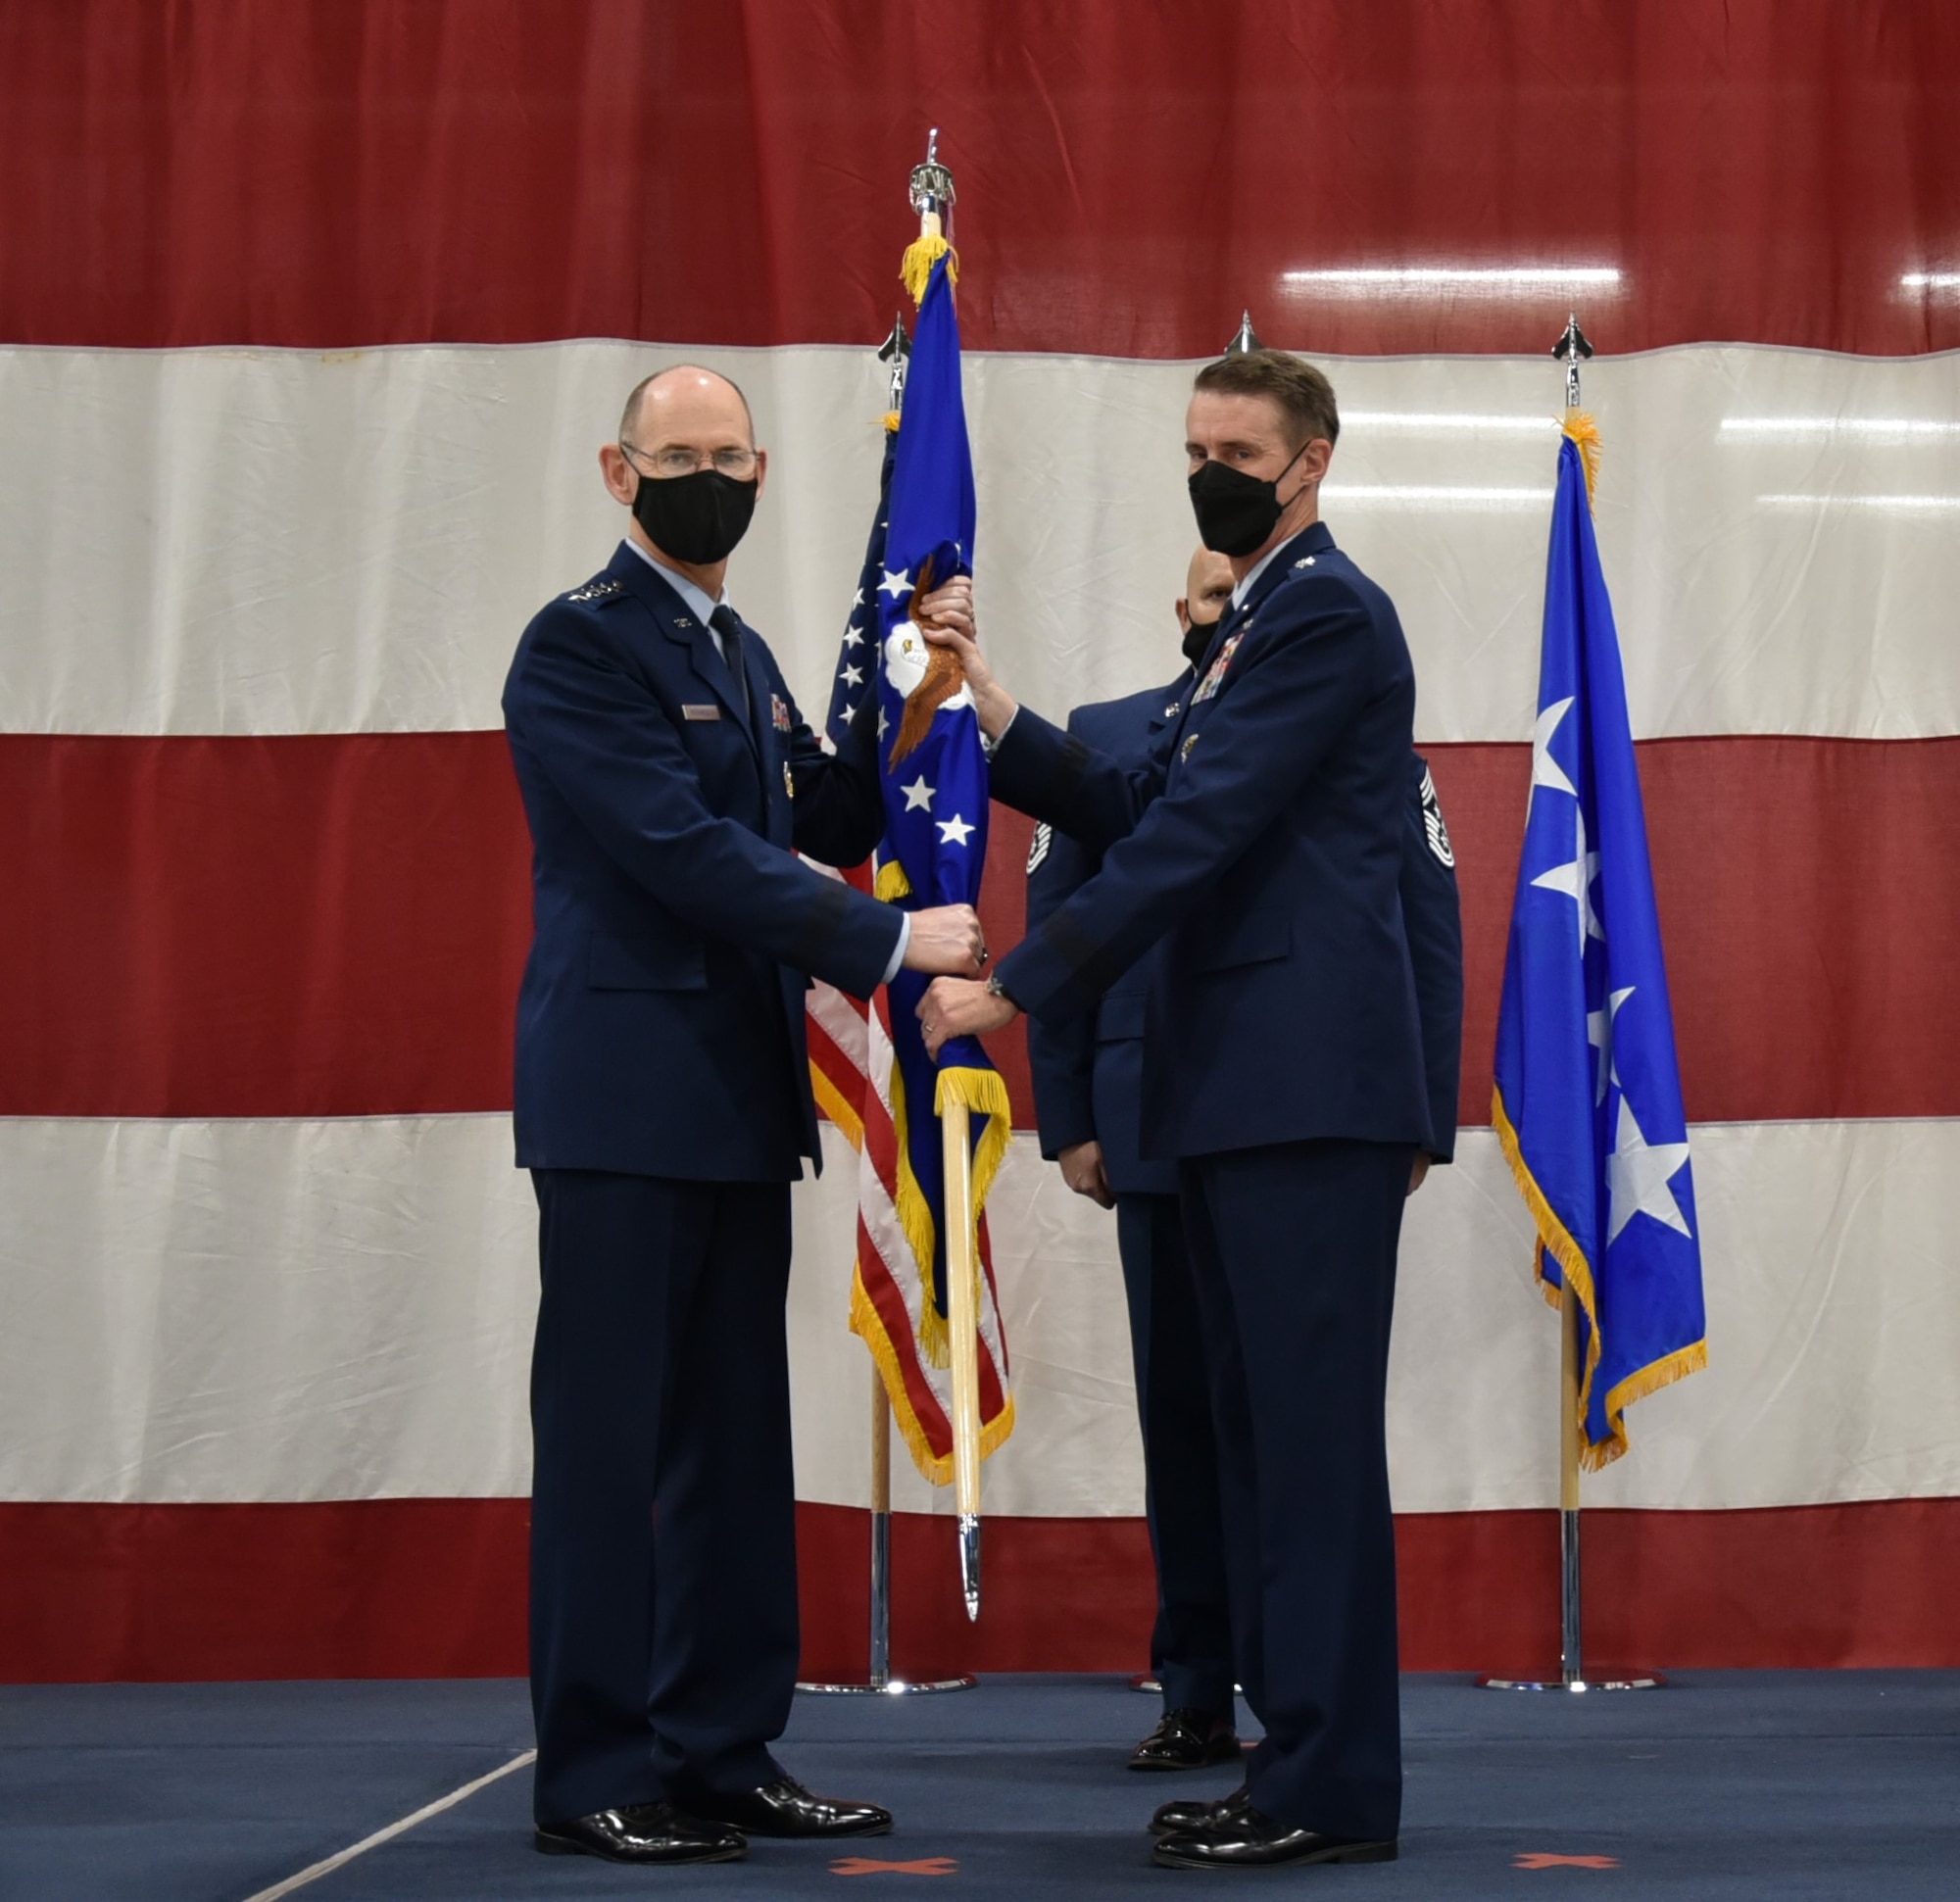 220815-F-UR719-4018
Gen. Duke Z. Richardson, commander, Air Force Materiel Command (left) holds the Air Force Sustainment Center provisional flag with Lt. Gen. Tom D. Miller (right) during a change of command ceremony at Tinker Air Force Base, Oklahoma, Aug. 15, 2022.